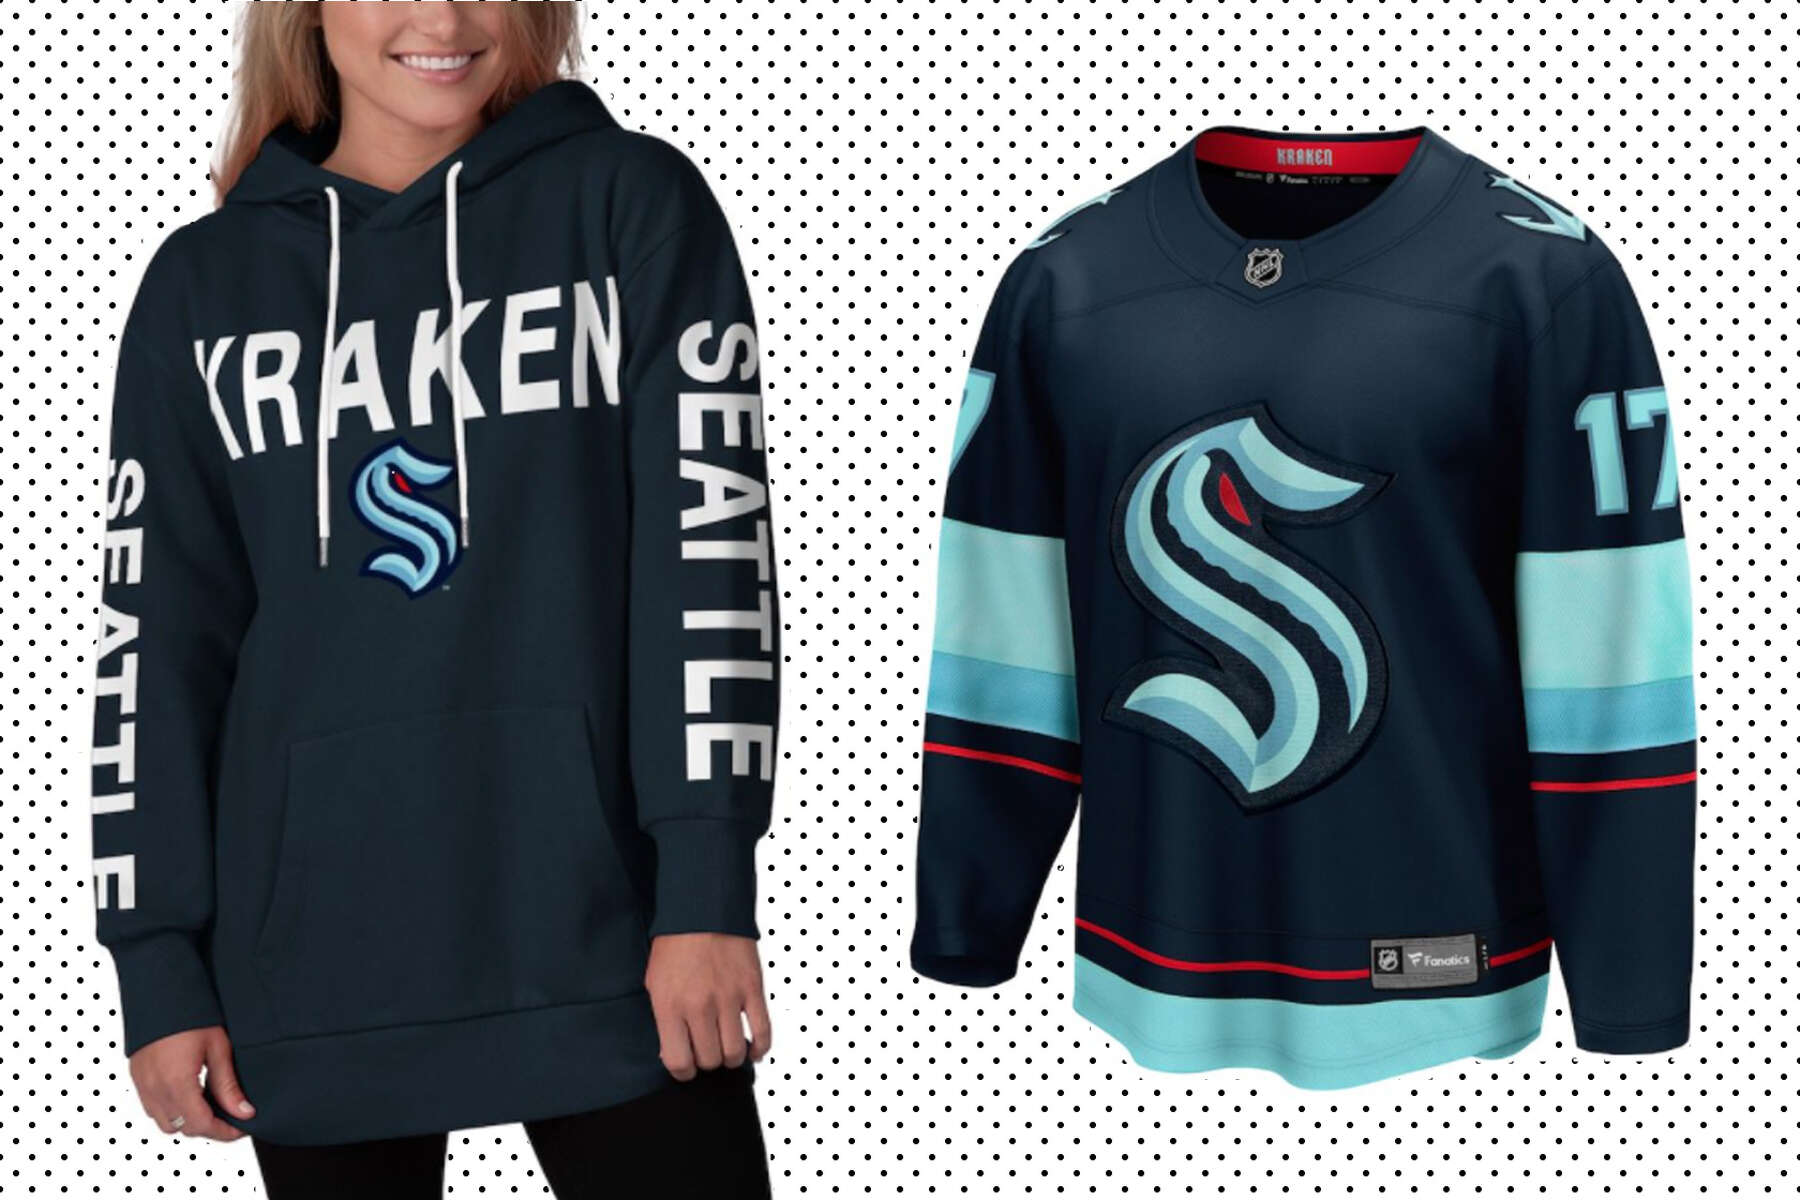 Inside The Rink - IT'S A SATURDAY SHOWDOWN! A battle of expansion  franchises, who has the best jersey design!? #NHL #VegasBorn #SeaKraken  Love these jerseys or another NHL sweater? Check them out